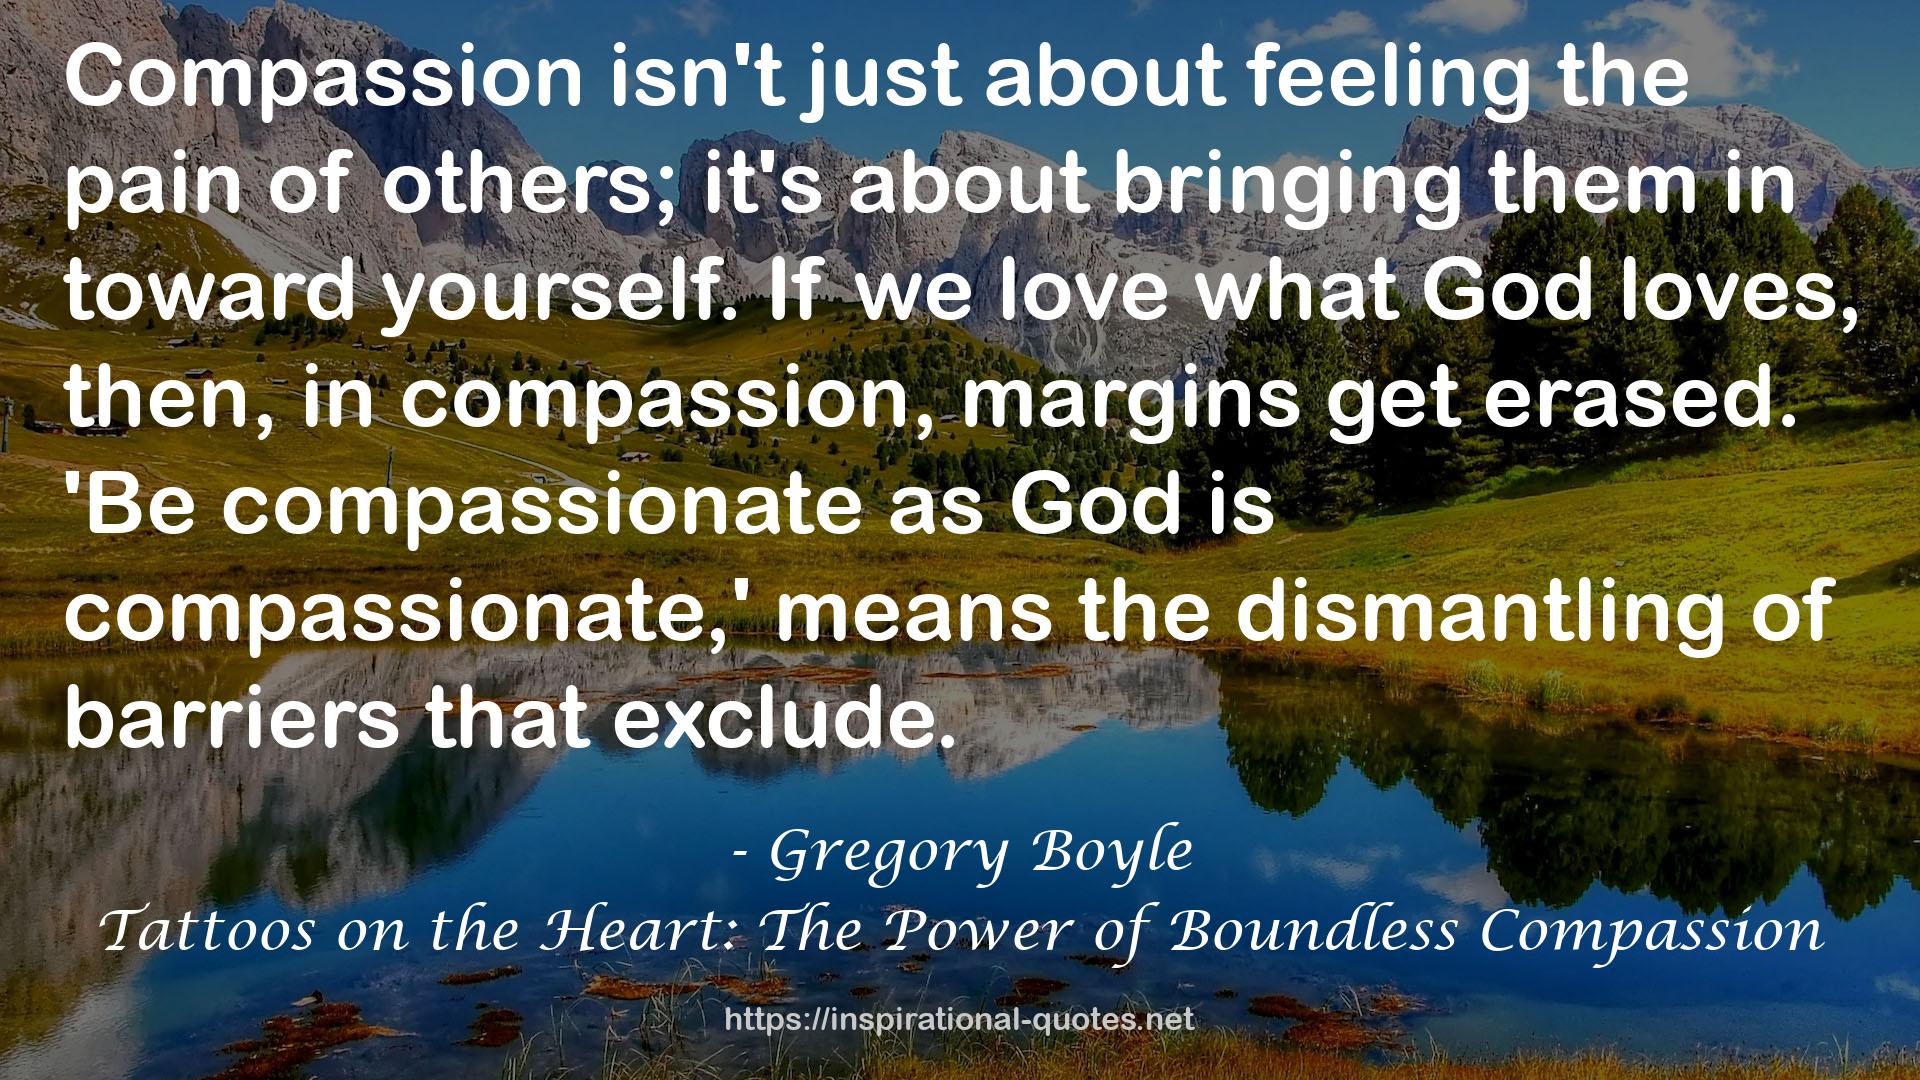 Tattoos on the Heart: The Power of Boundless Compassion QUOTES